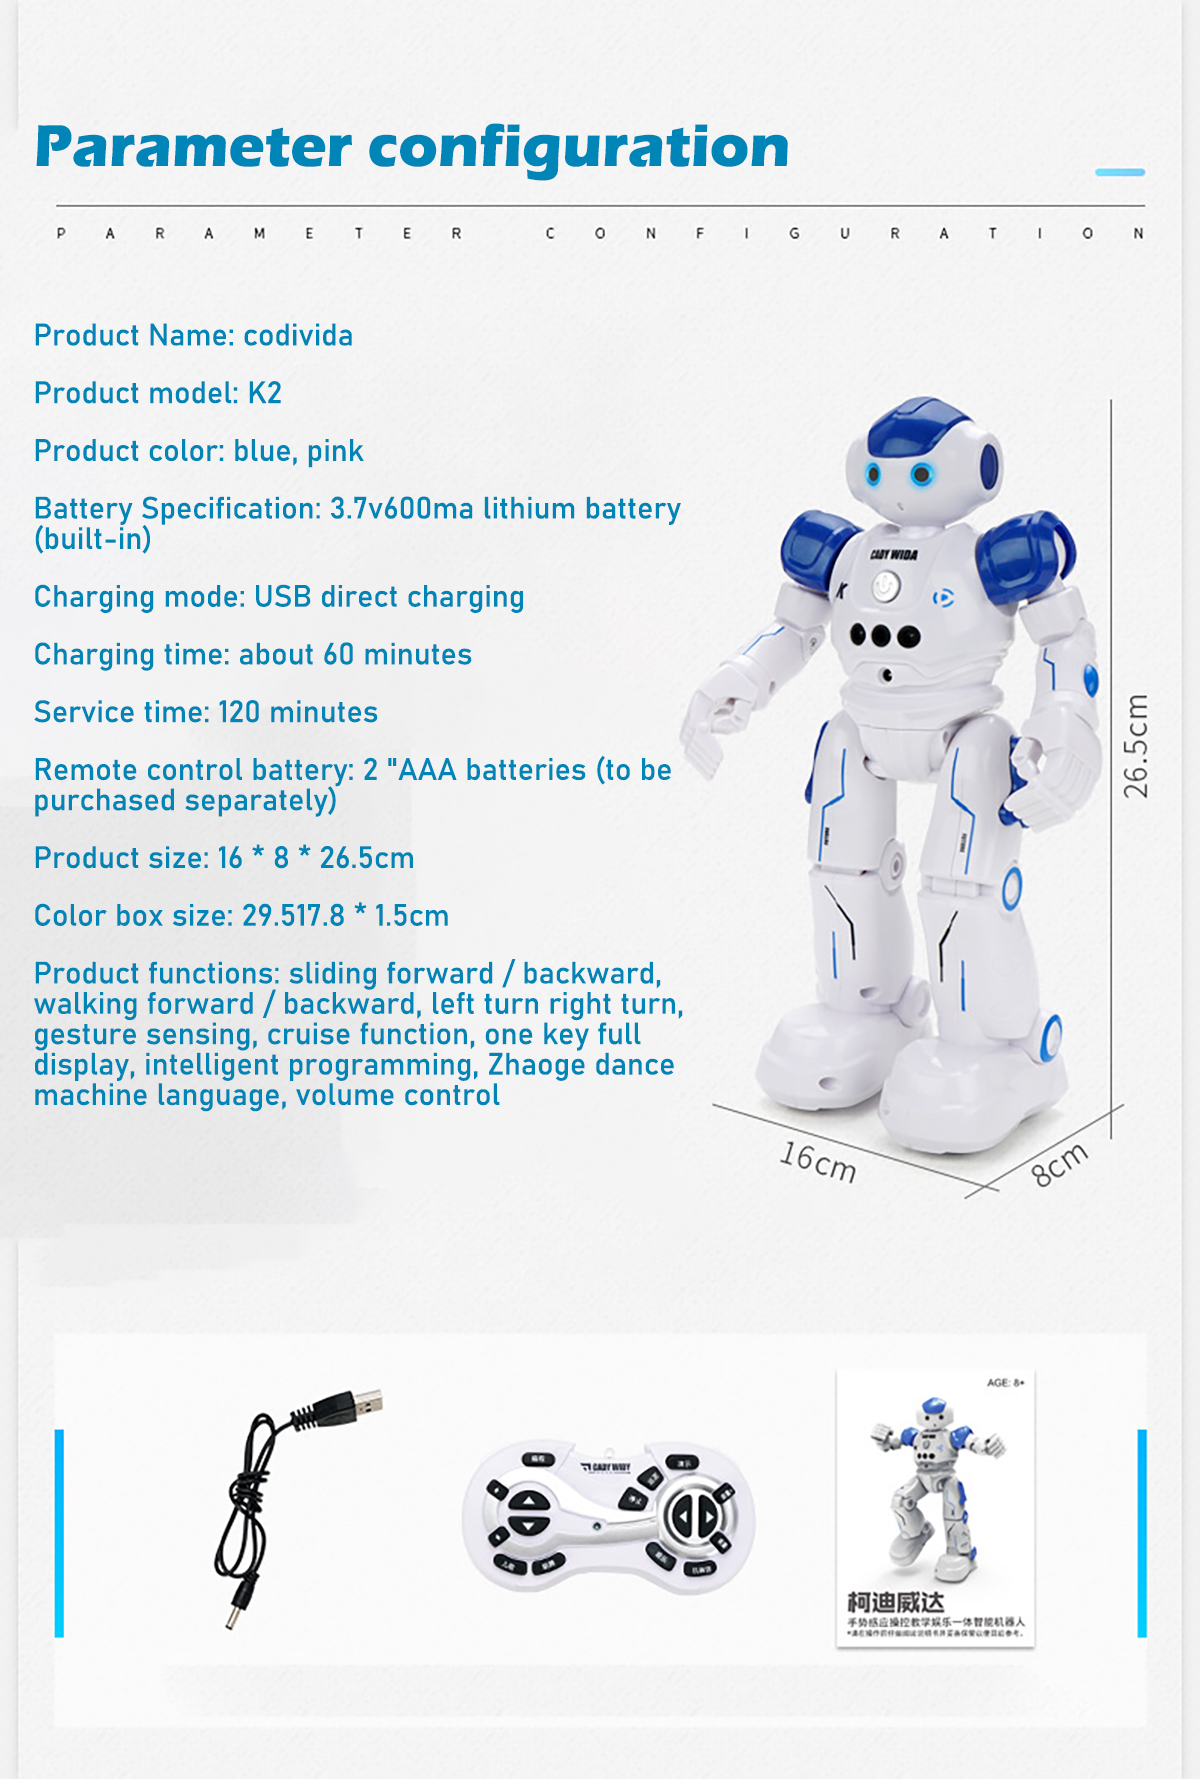 JJRC-R2S-Remote-Control-Programming-Gesture-Induction-Dancing-Robot-1887329-20